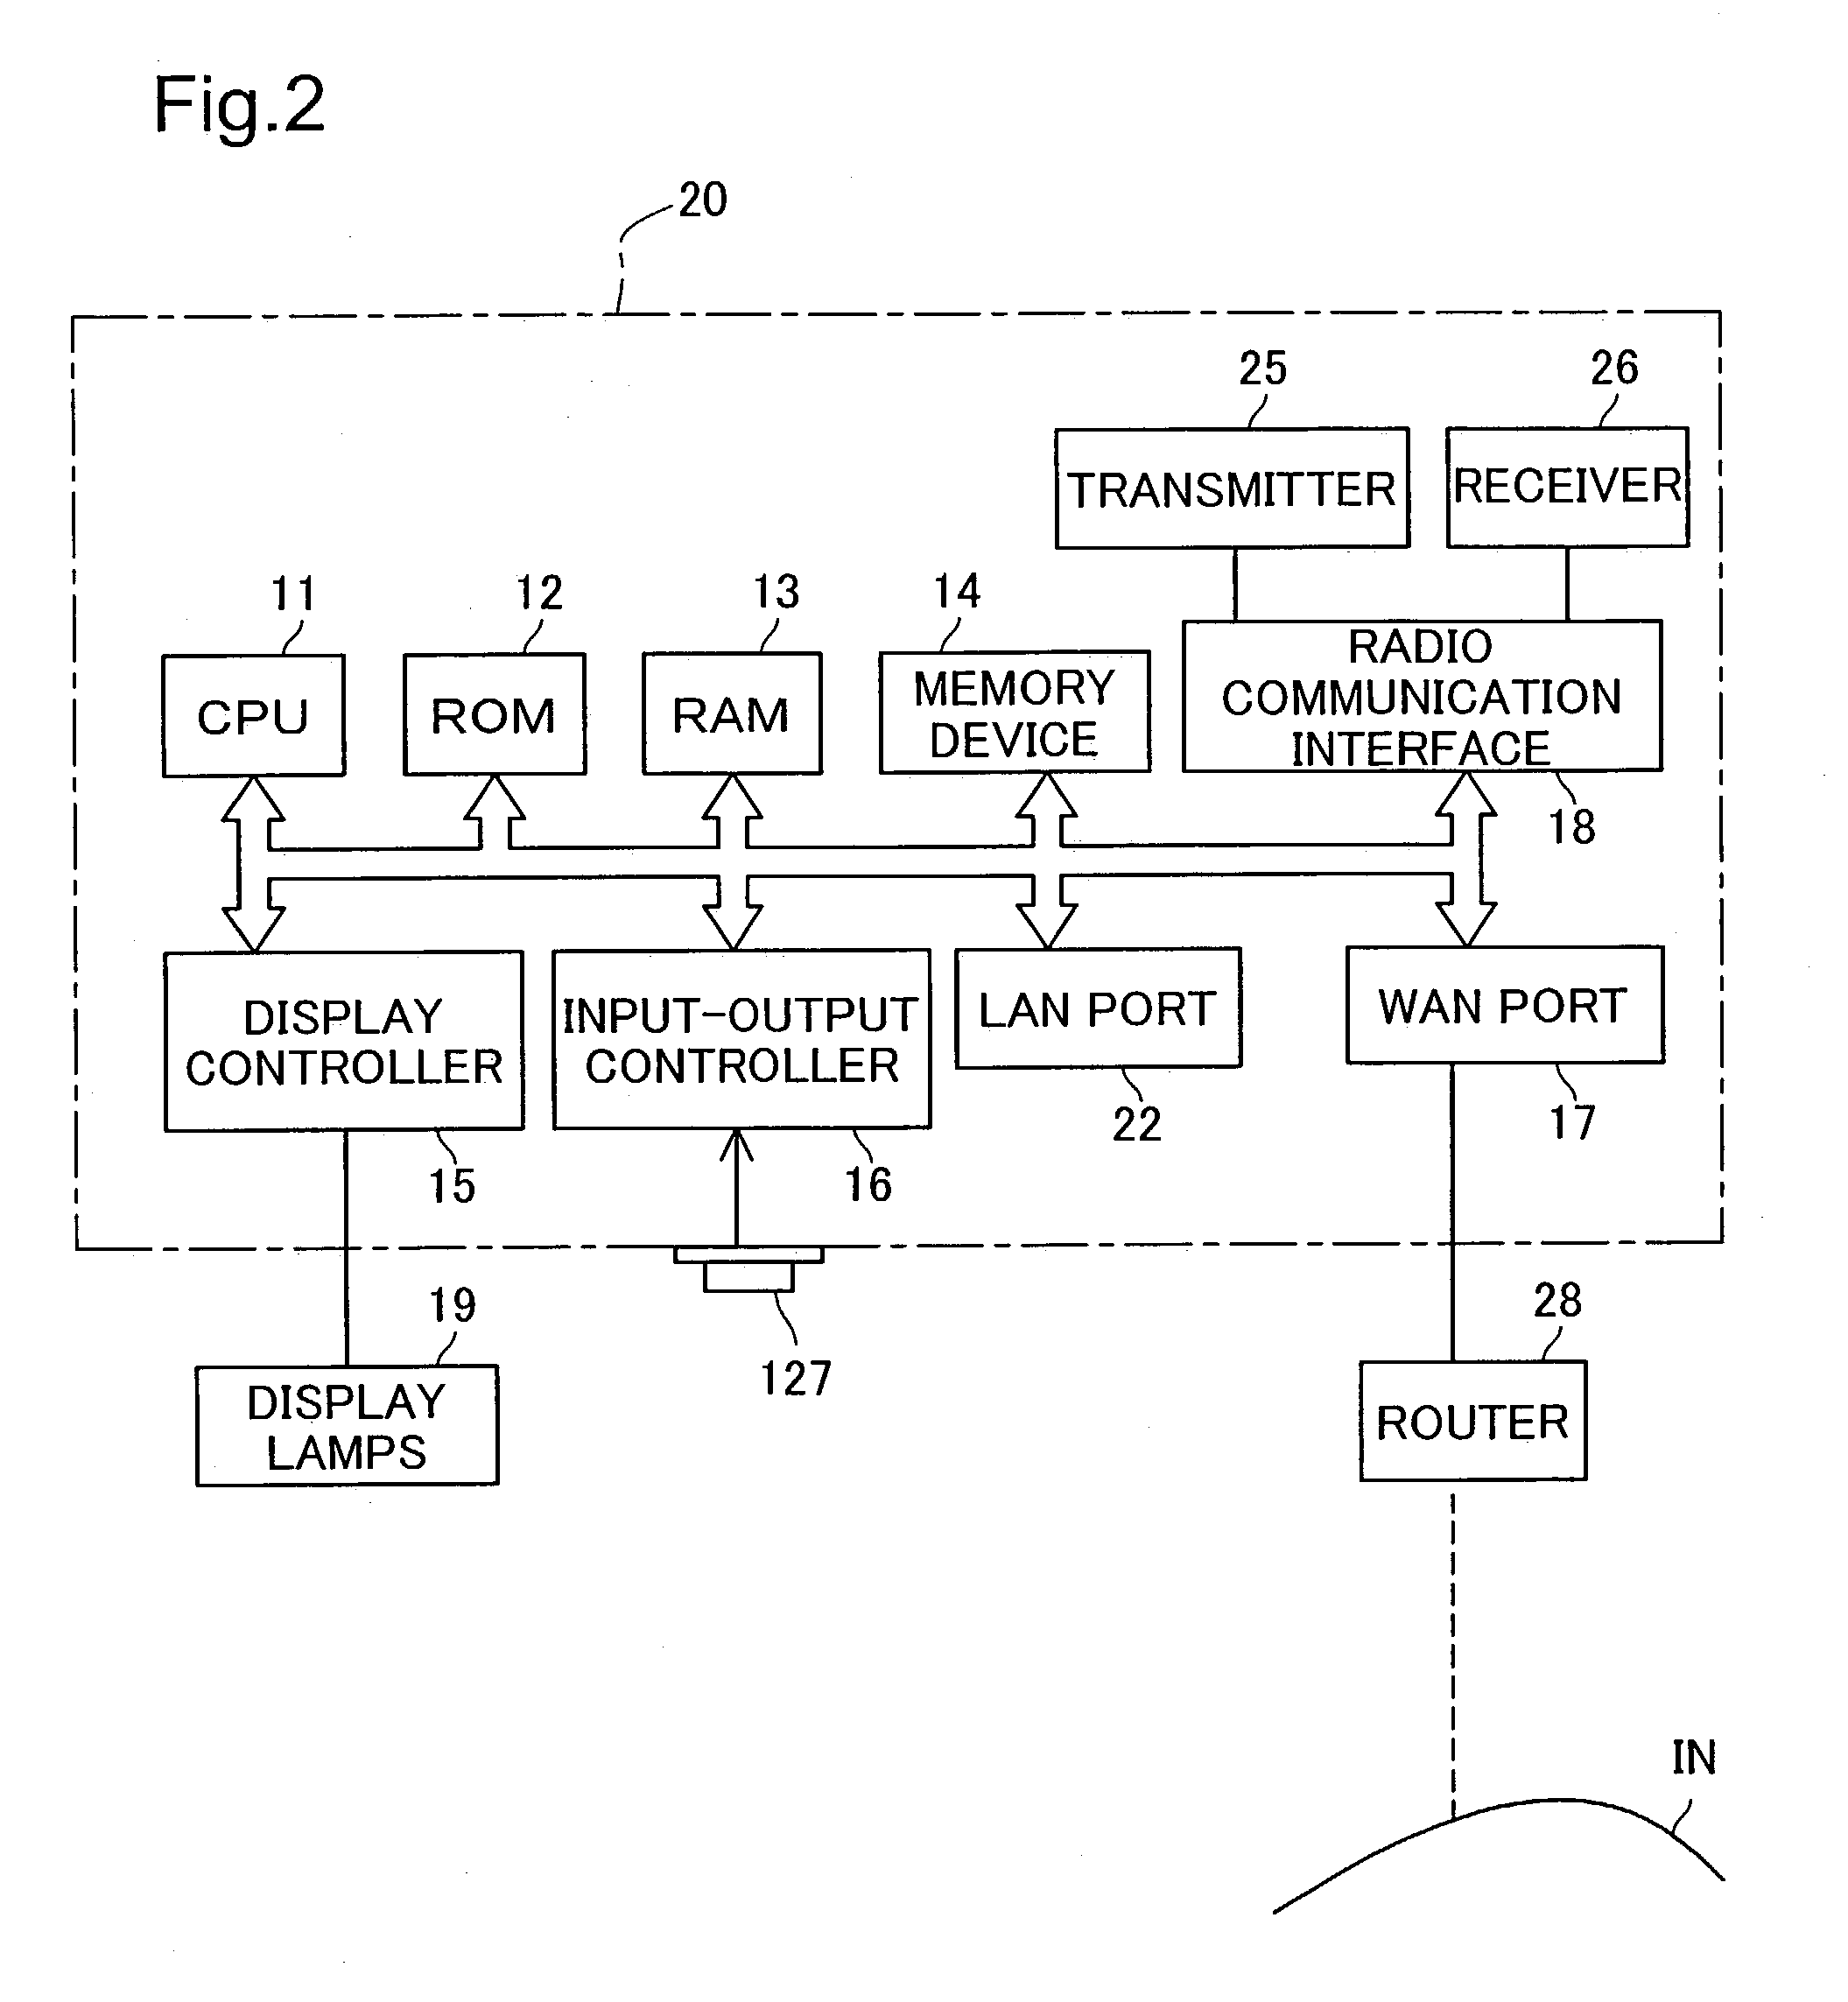 Encryption key setting system, access point, encryption key setting method, and authentication code setting system